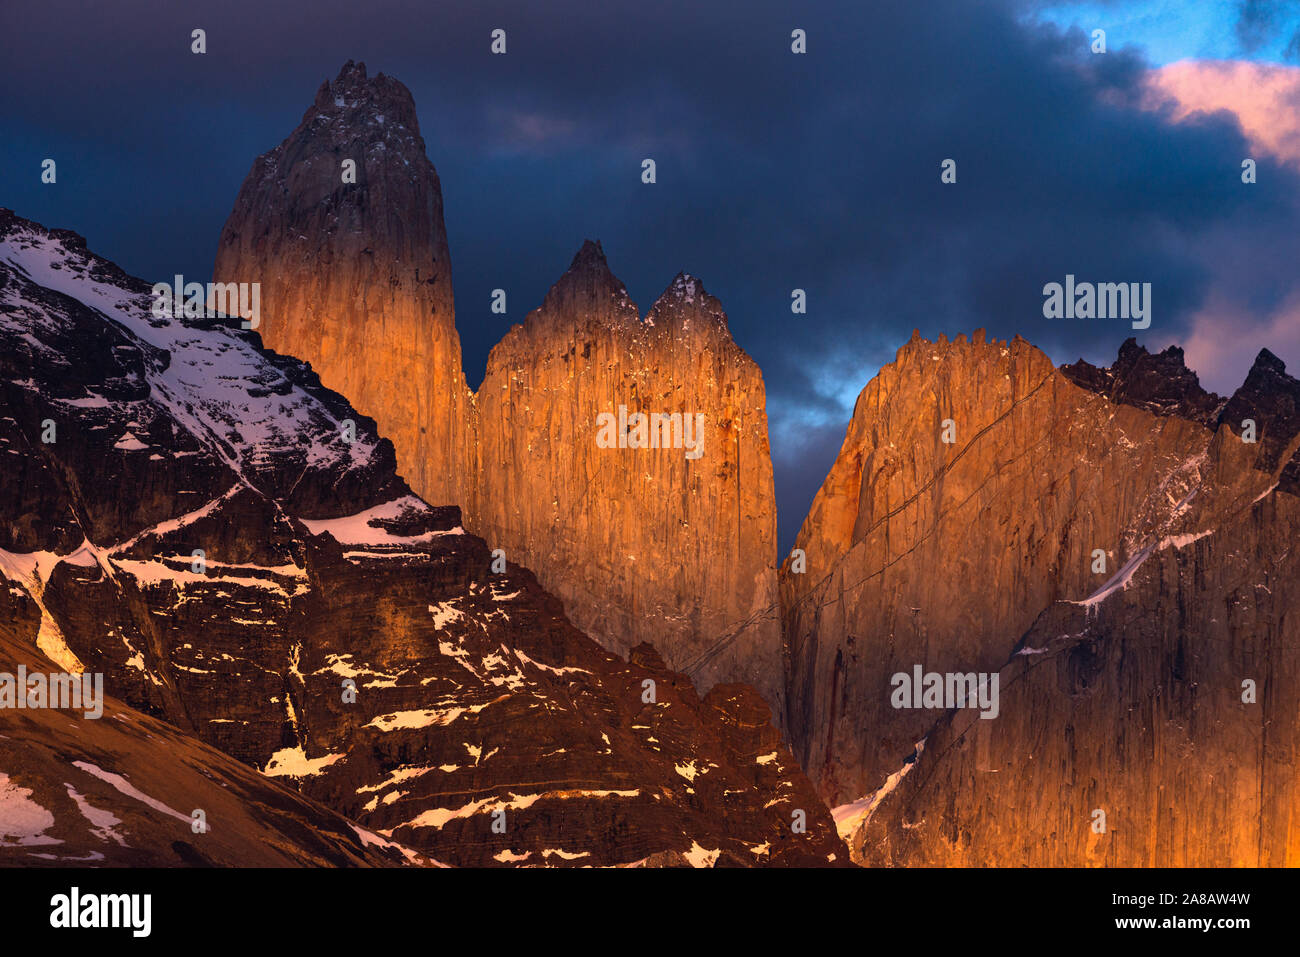 The famous granite peaks of Torres del painel National Park, Chile Stock Photo